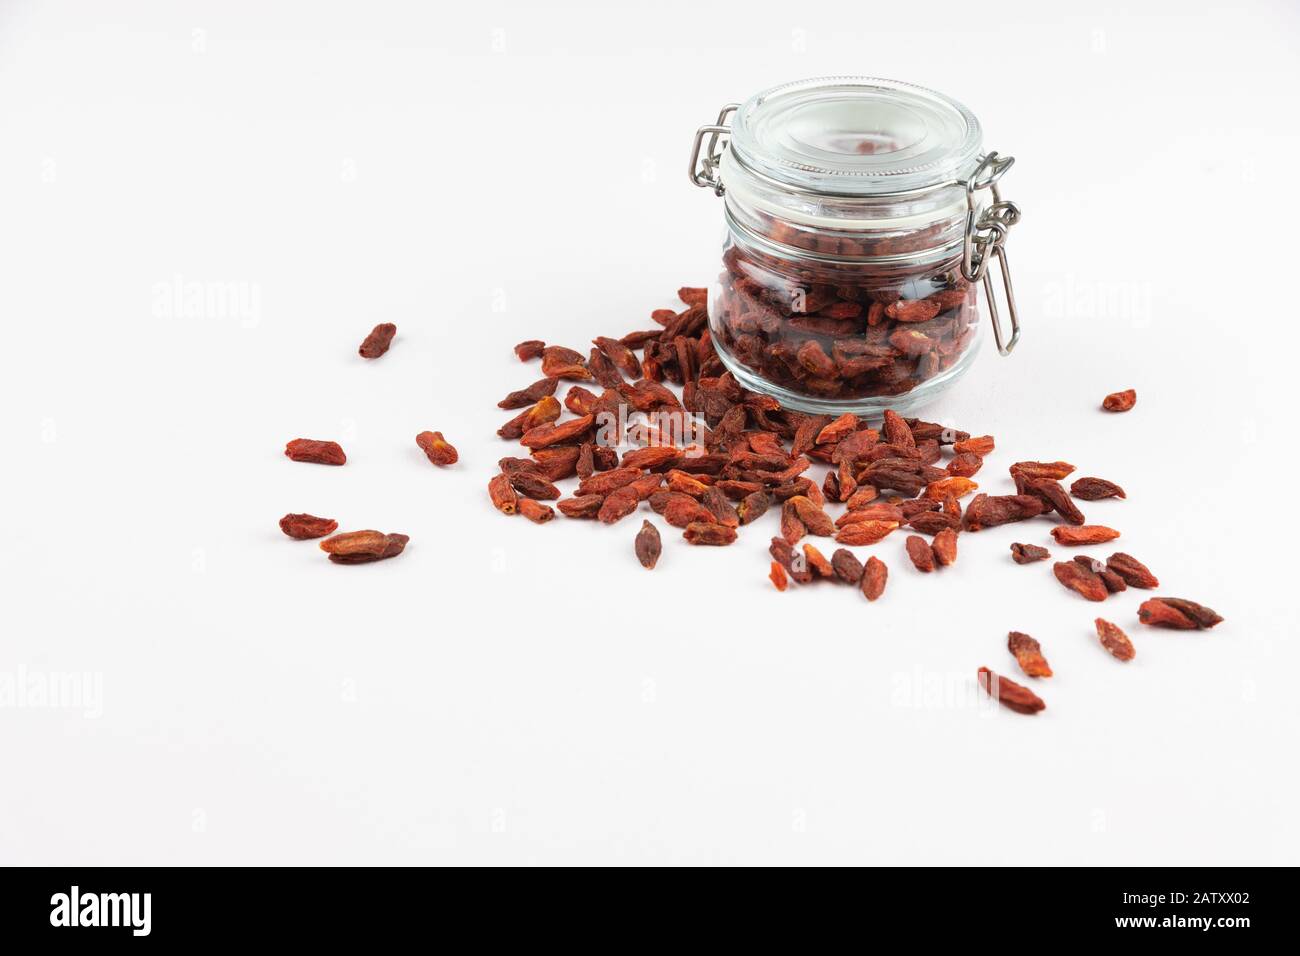 Glass jar full of goji berries, and more red berries on the table, isolated on white background Stock Photo